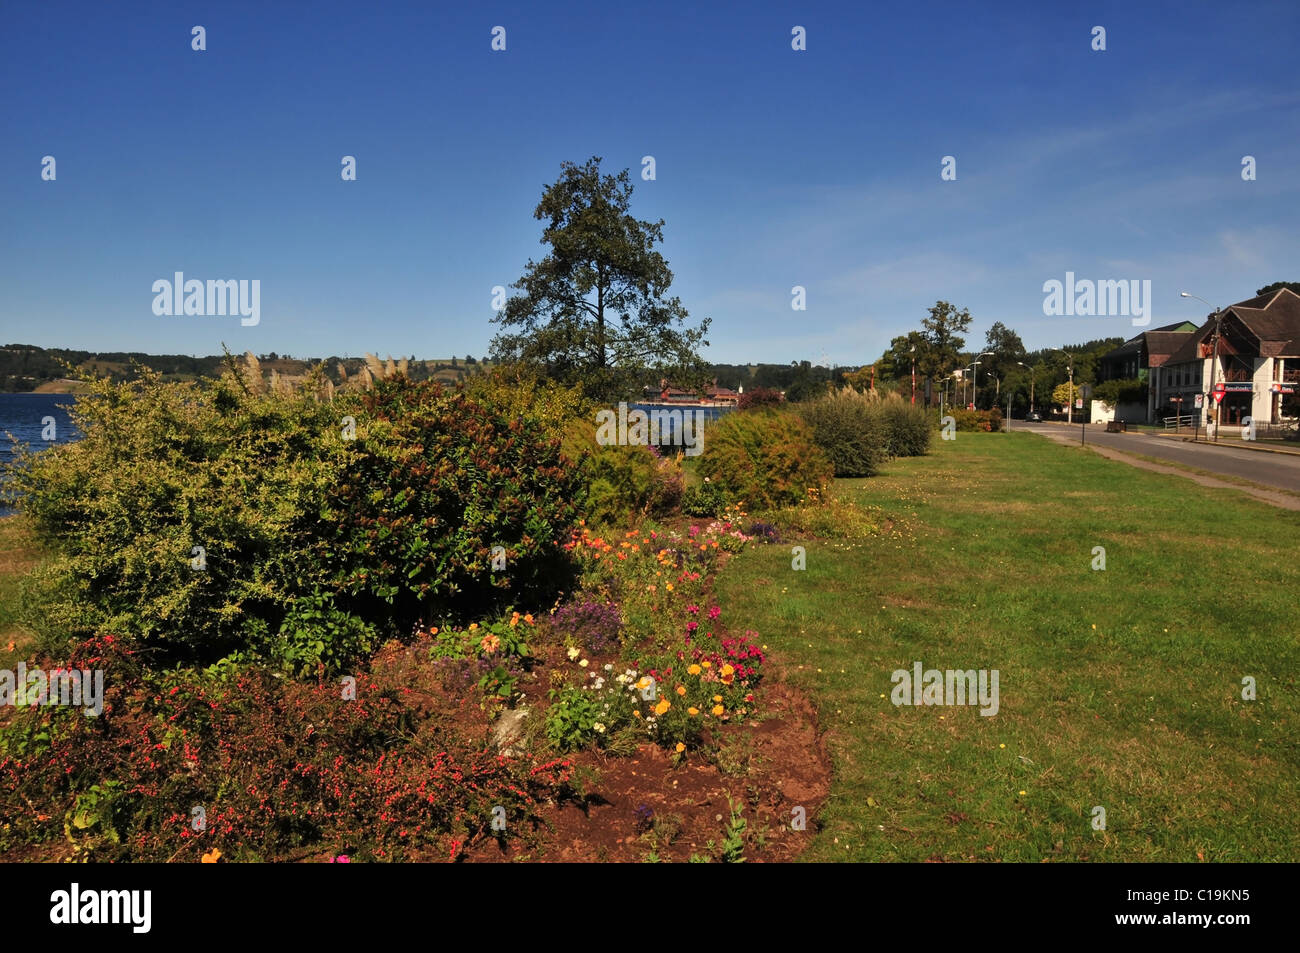 Blue sky view of garden flowers, shrubs, trees and wide expanse of roadside grass, Lake Llanquihue waterfront, Frutillar, Chile Stock Photo